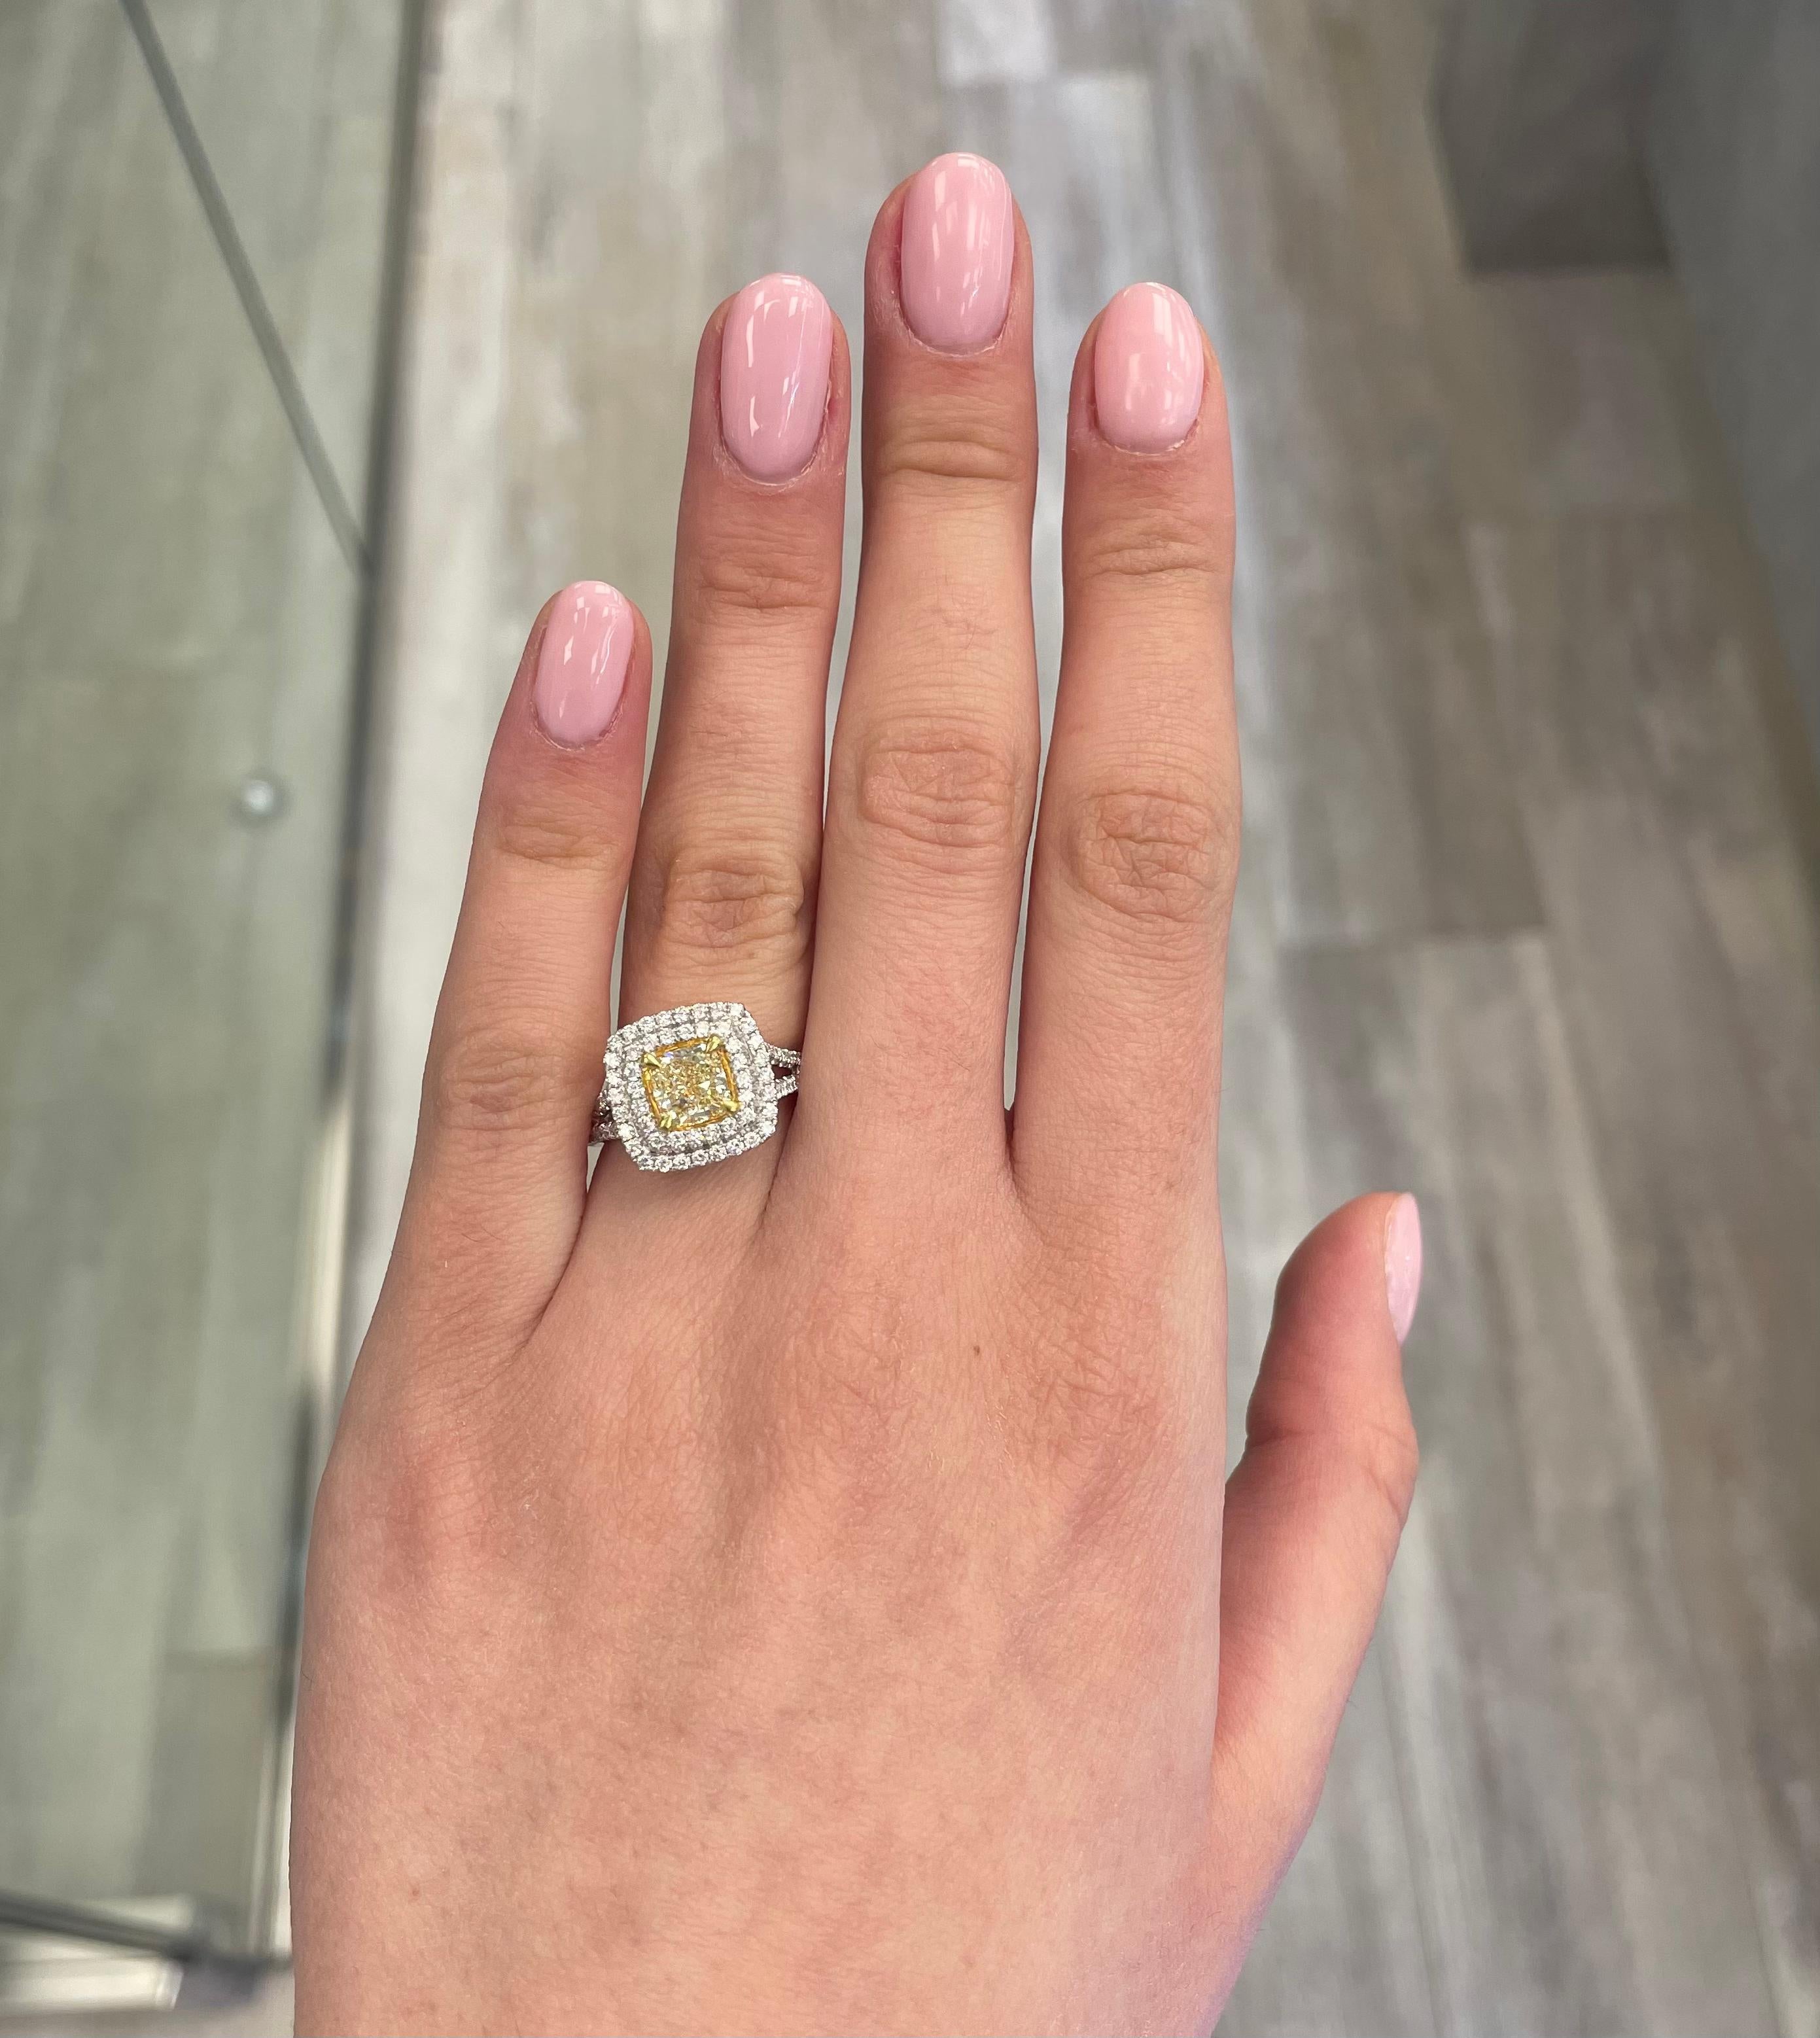 Stunning modern EGL certified fancy yellow diamond double halo ring, two-tone 18k yellow and white gold, split shank. By Alexander Beverly Hills
2.05 carats total diamond weight.
1.23 carat cushion cut Fancy Yellow color and VS1 clarity diamond, EGL